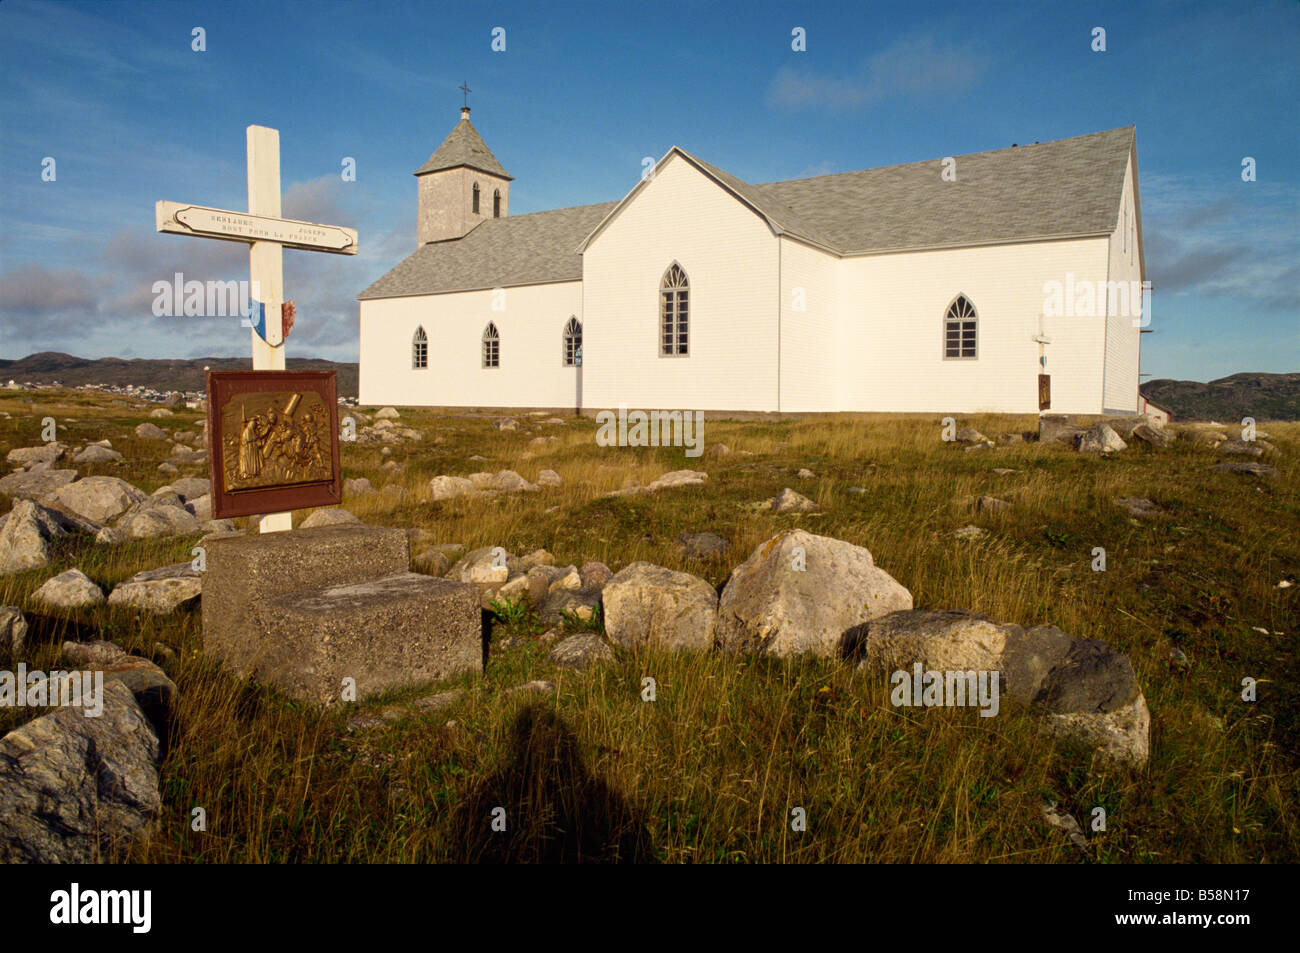 Station of the Cross and church at St. Pierre et Miquelon on the Isle aux Marins, an island near Newfoundland, Canada Stock Photo